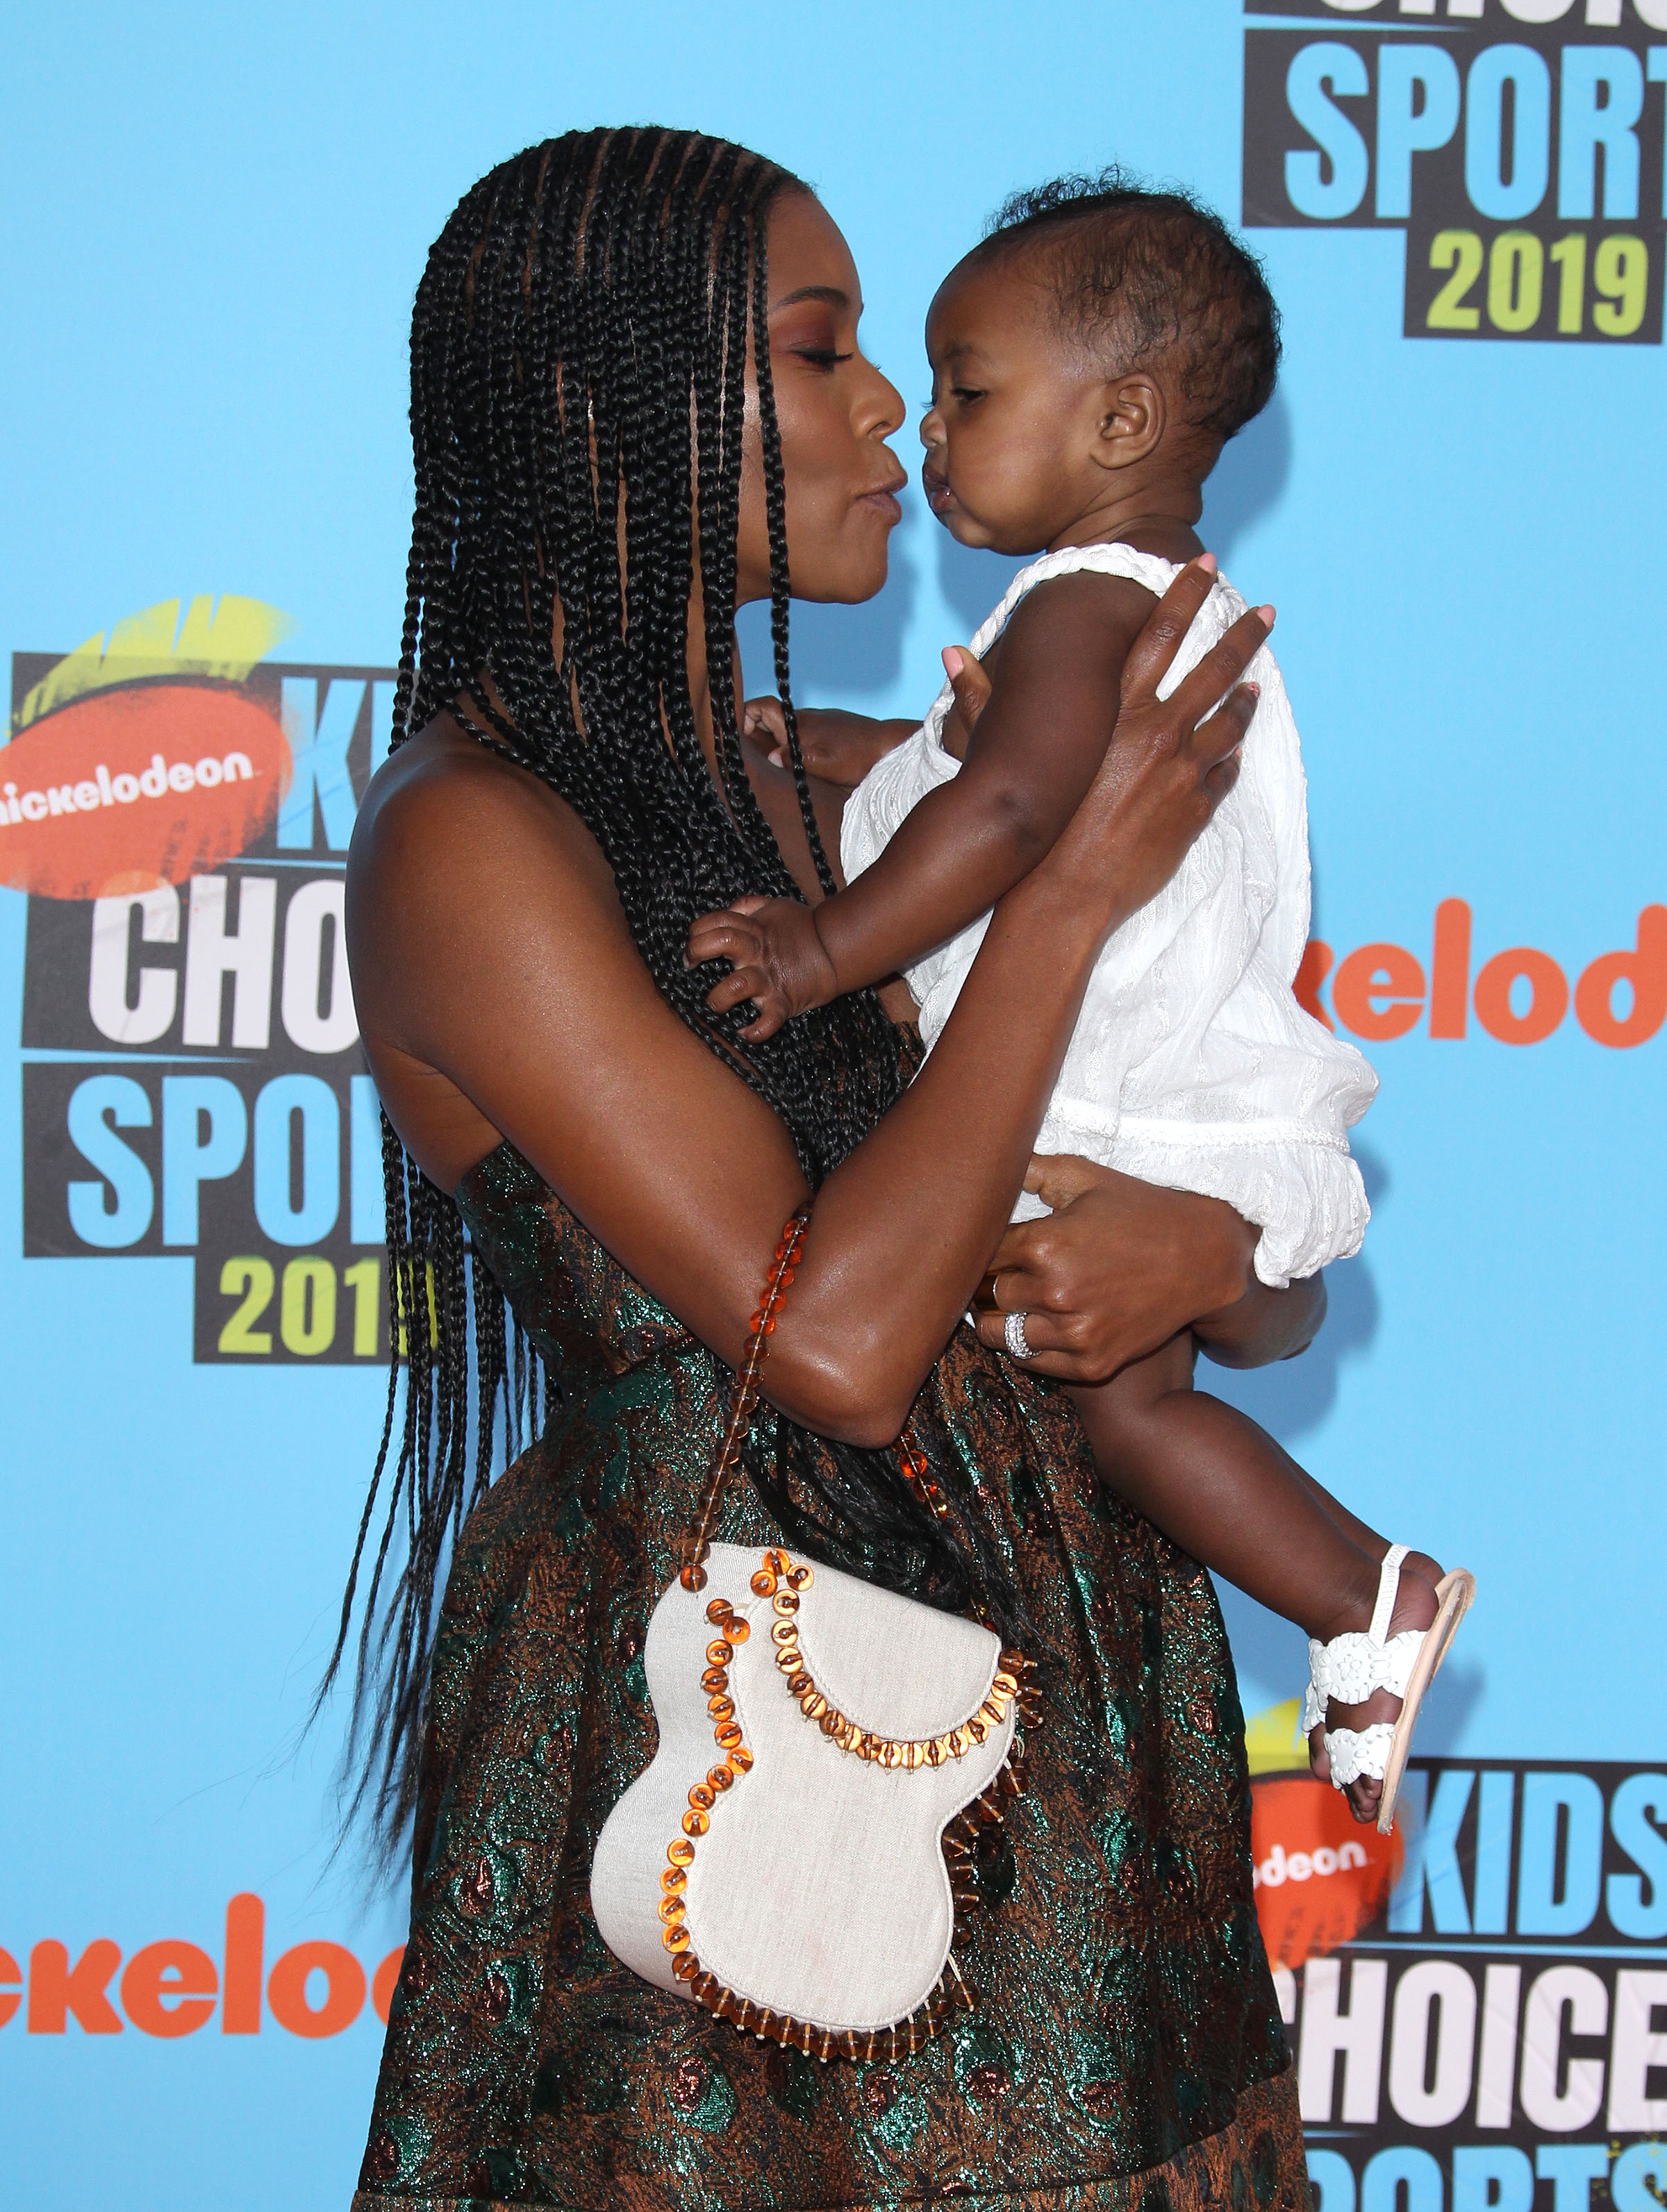 Gabrielle Union and Dwyane Wade's daughter Kaavia James